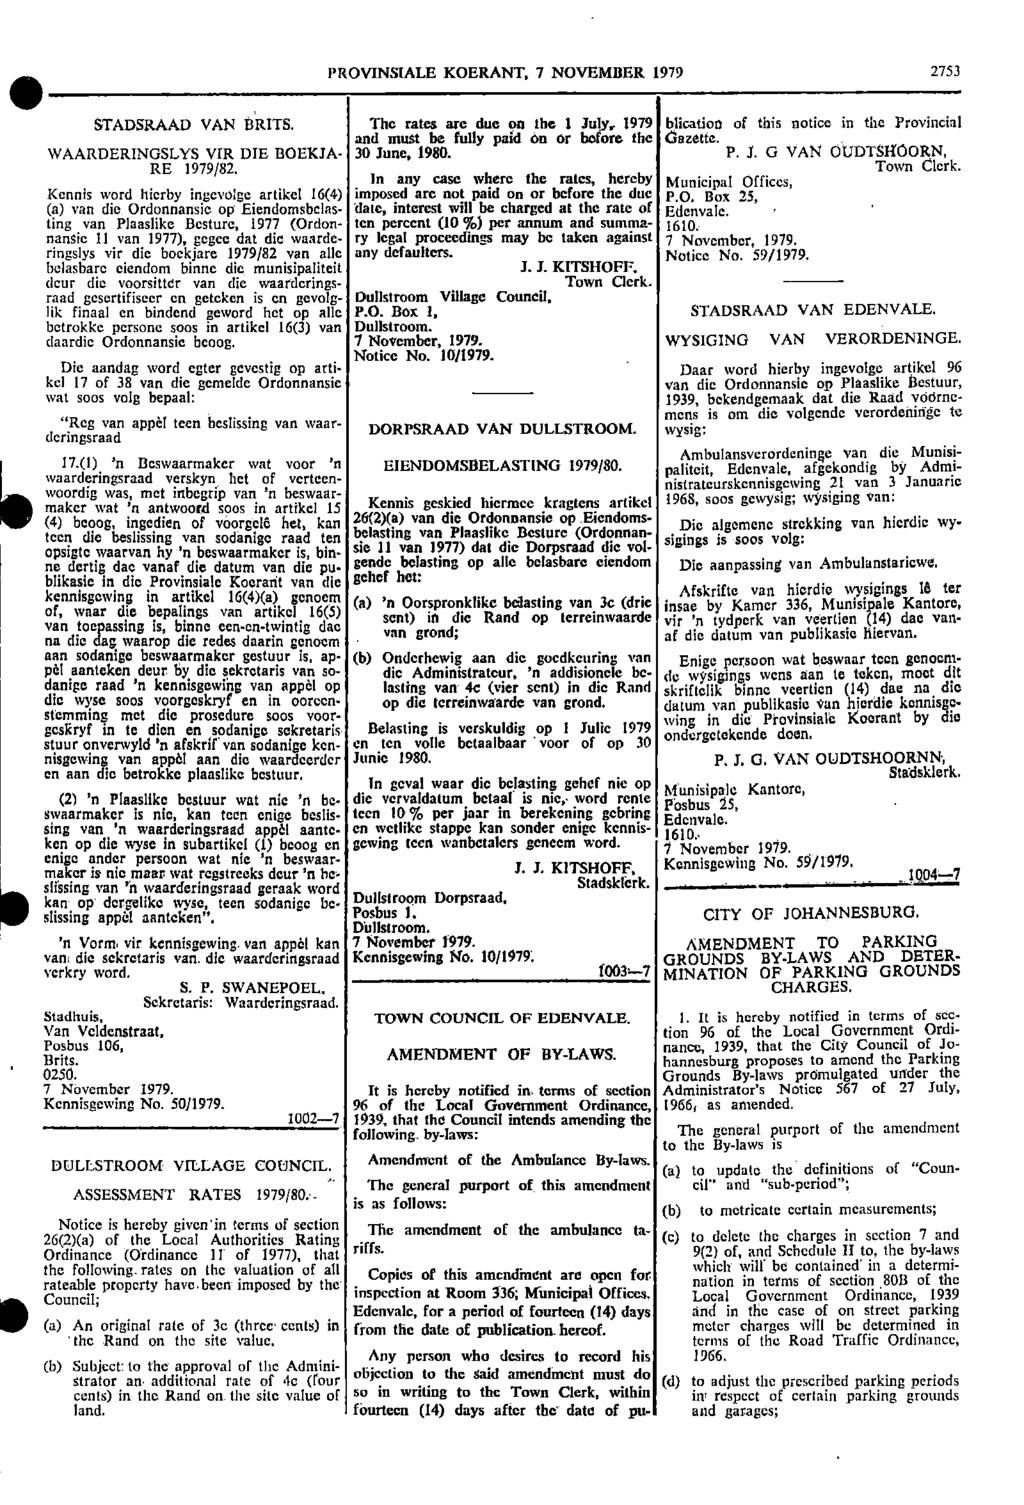 Detesting 411 6 PROVNSALE KOERANT 7 NOVEMBER 1979 2753 STADSRAAD VAN BRTS The rates are due on the 1 July 1979 blication of this notice in the Provincial and must be fully paid on or before the